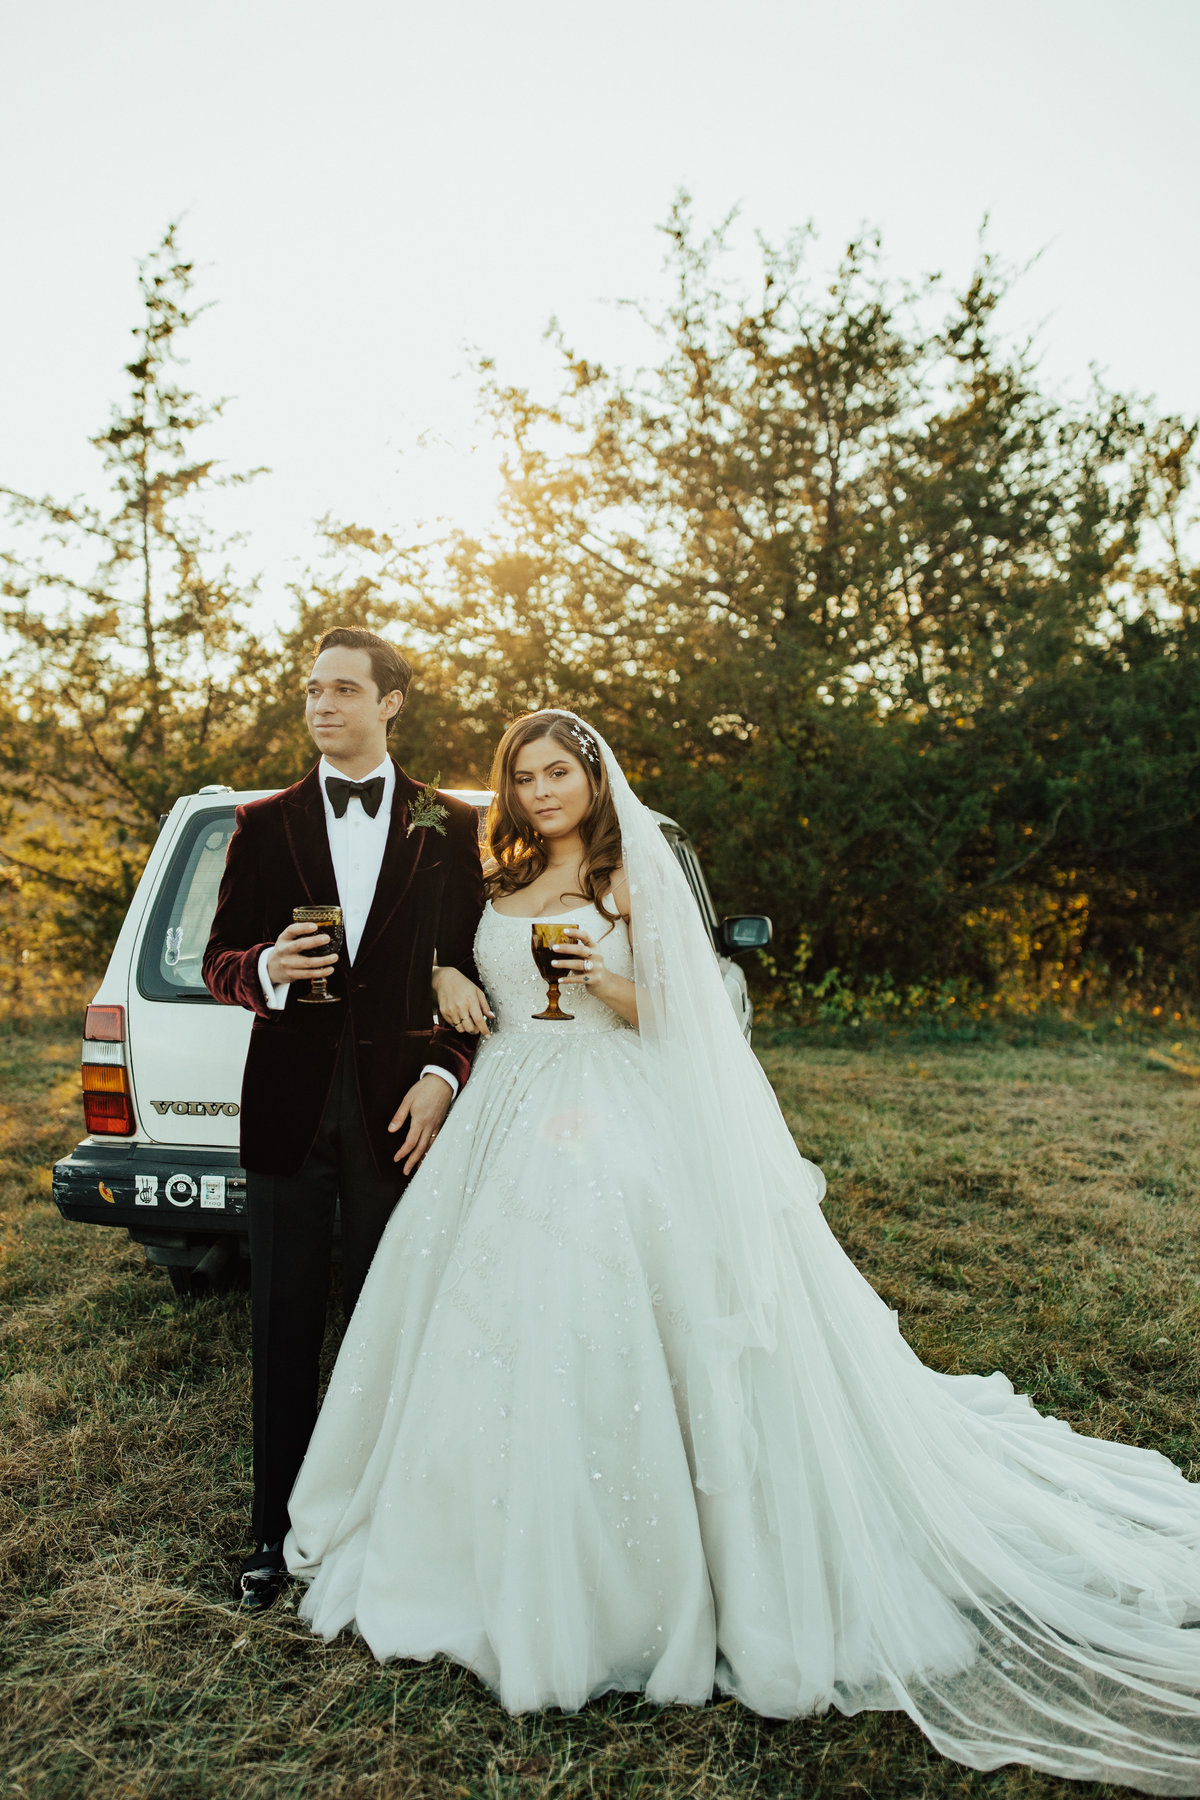 Christy-l-Johnston-Photography-Monica-Relyea-Events-Noelle-Downing-Instagram-Noelle_s-Favorite-Day-Wedding-Battenfelds-Christmas-tree-farm-Red-Hook-New-York-Hudson-Valley-upstate-november-2019-AP1A8403